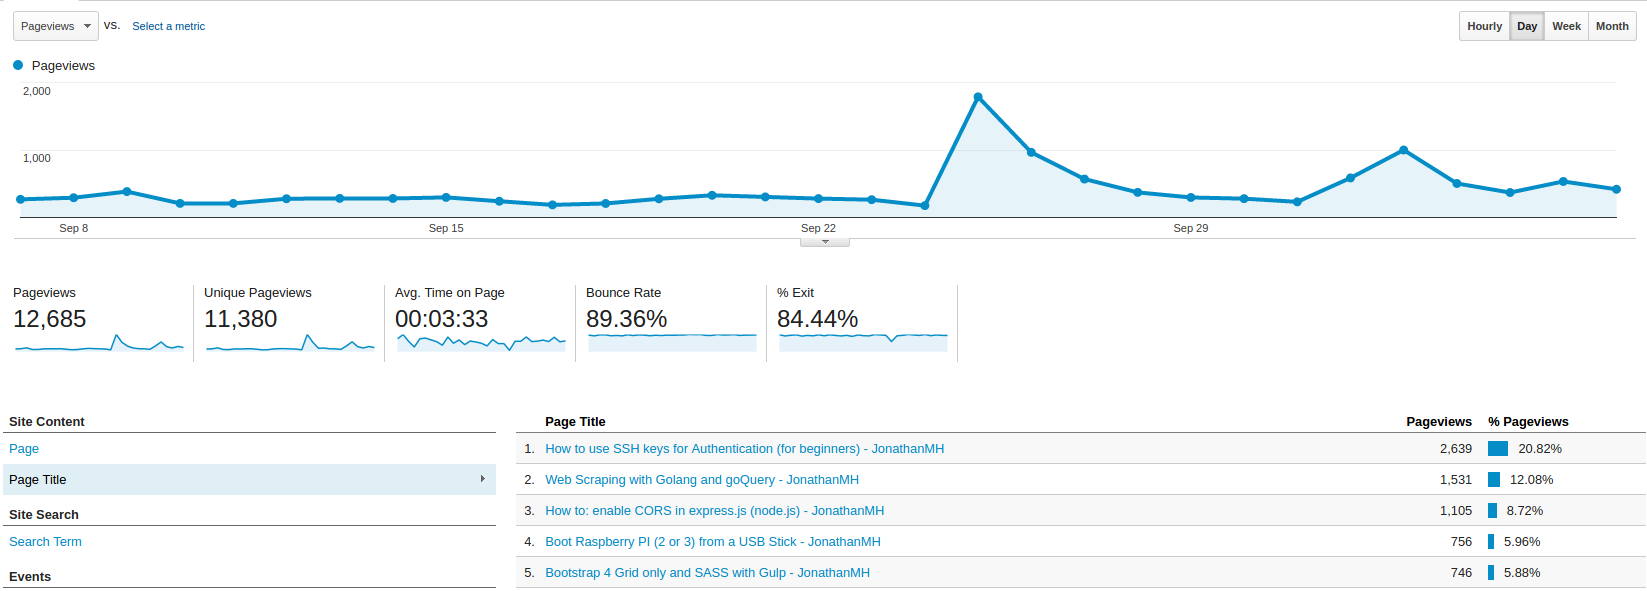 pageviews-by-page-google-analytics